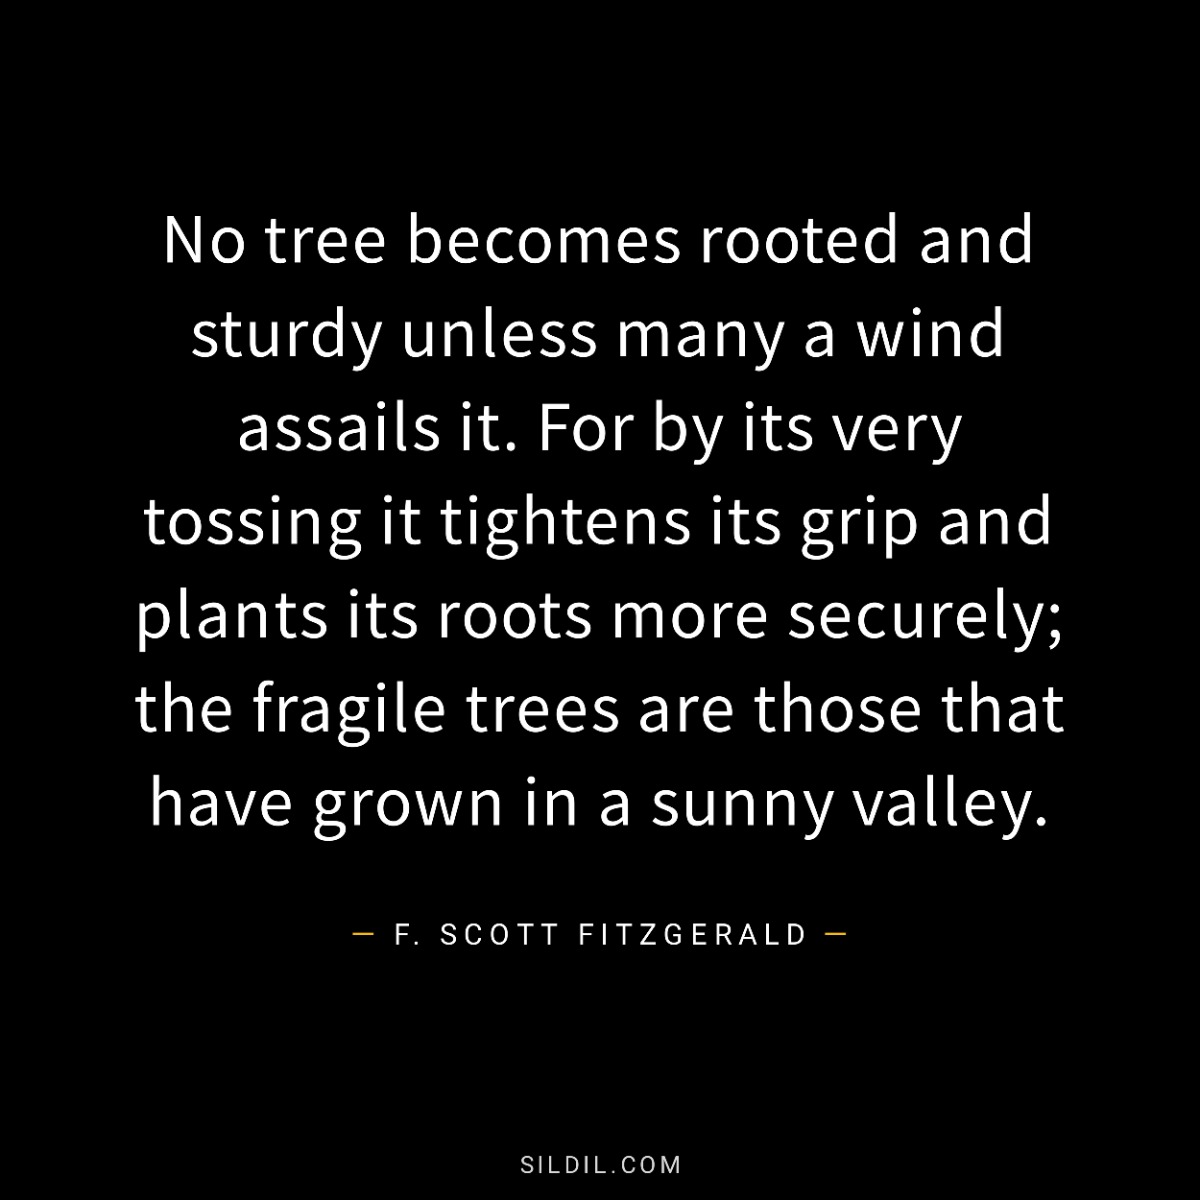 No tree becomes rooted and sturdy unless many a wind assails it. For by its very tossing it tightens its grip and plants its roots more securely; the fragile trees are those that have grown in a sunny valley.